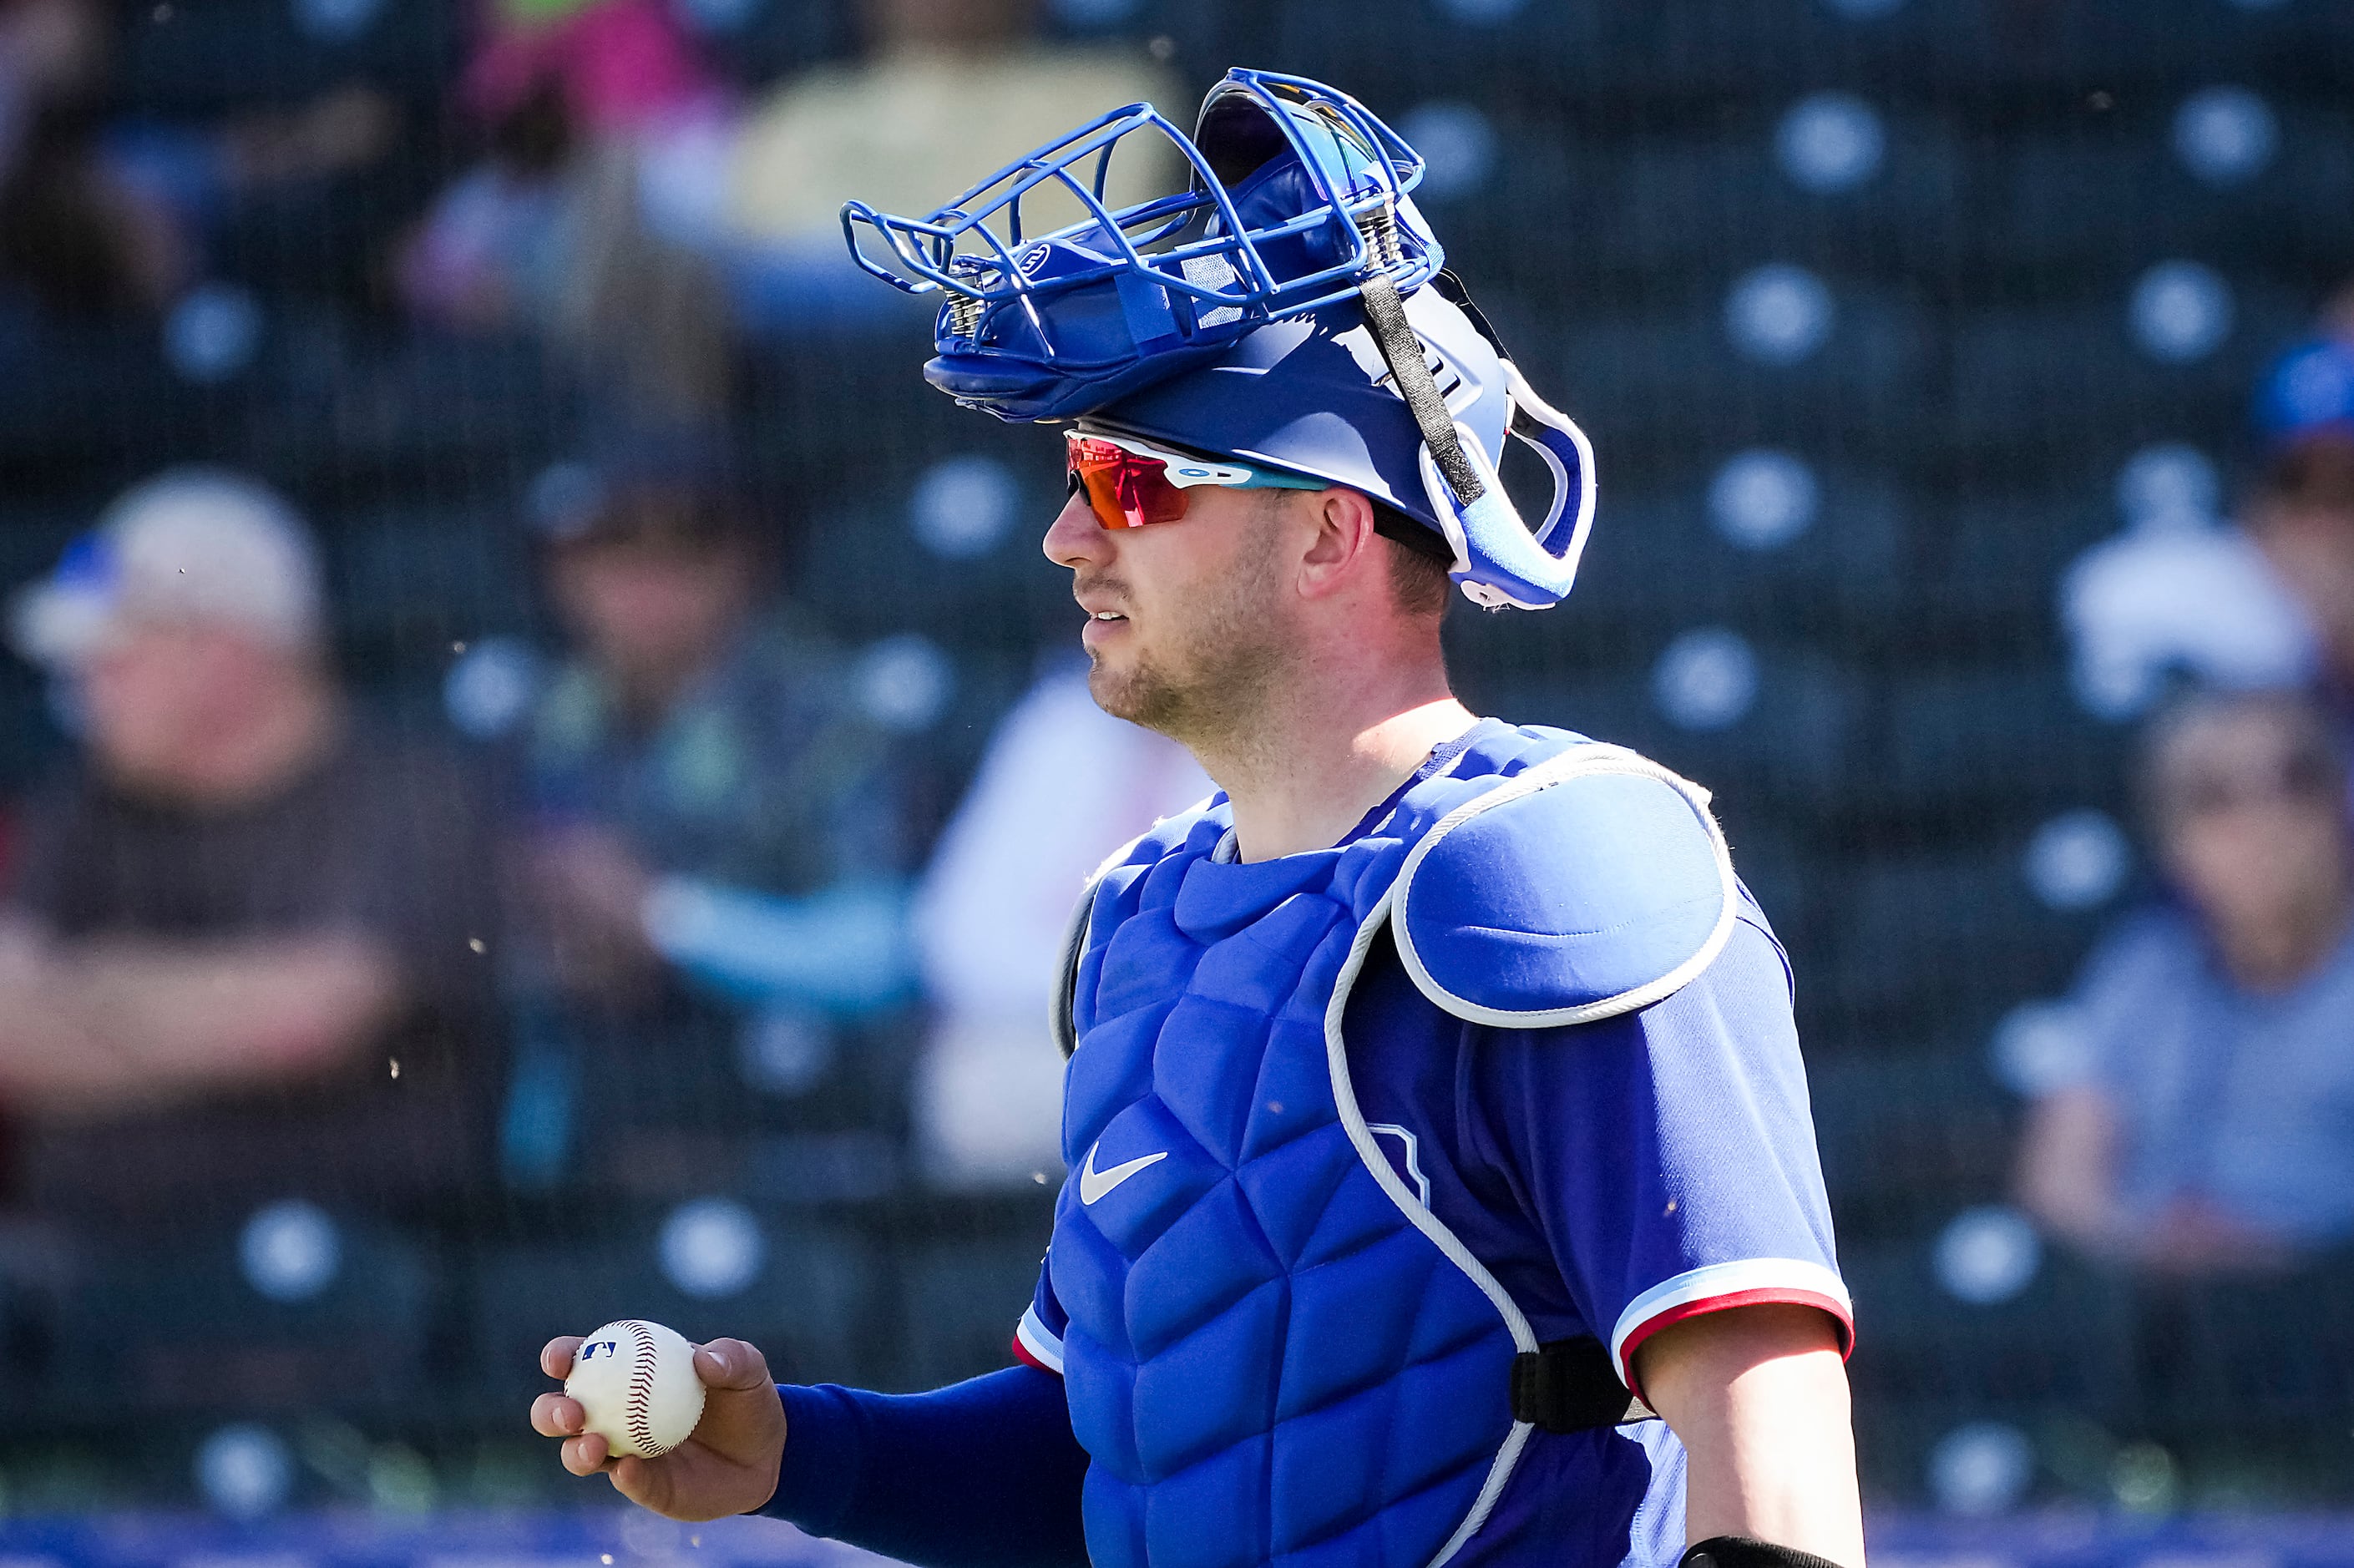 Mitch Garver's health is a concern, but Rangers believe a silver